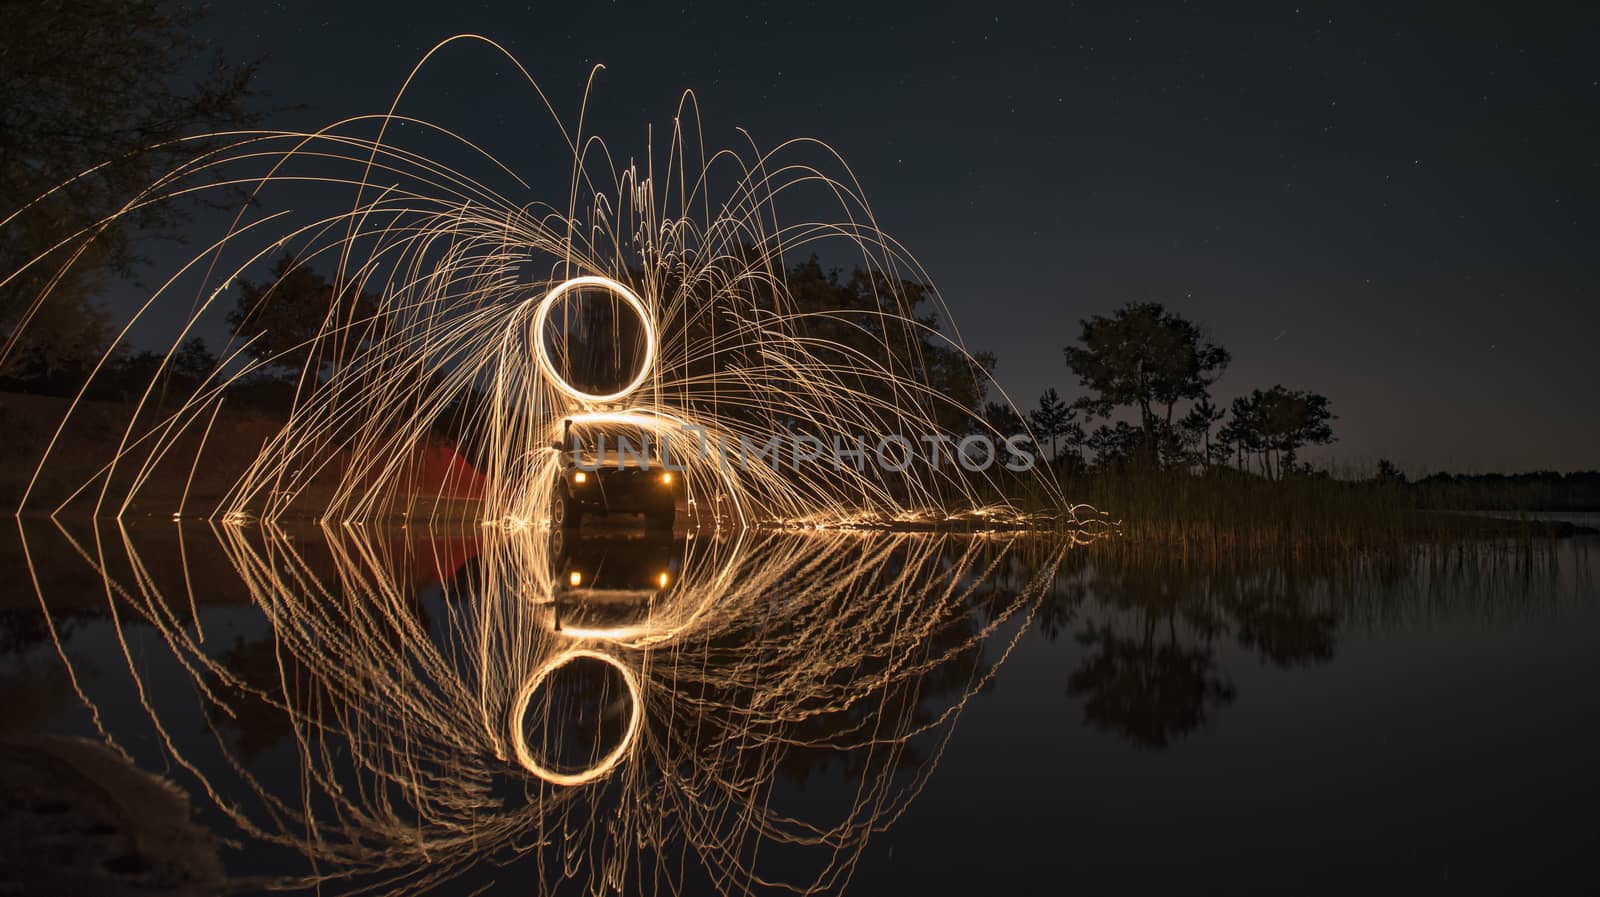 example of long exposure photography by crazymedia007